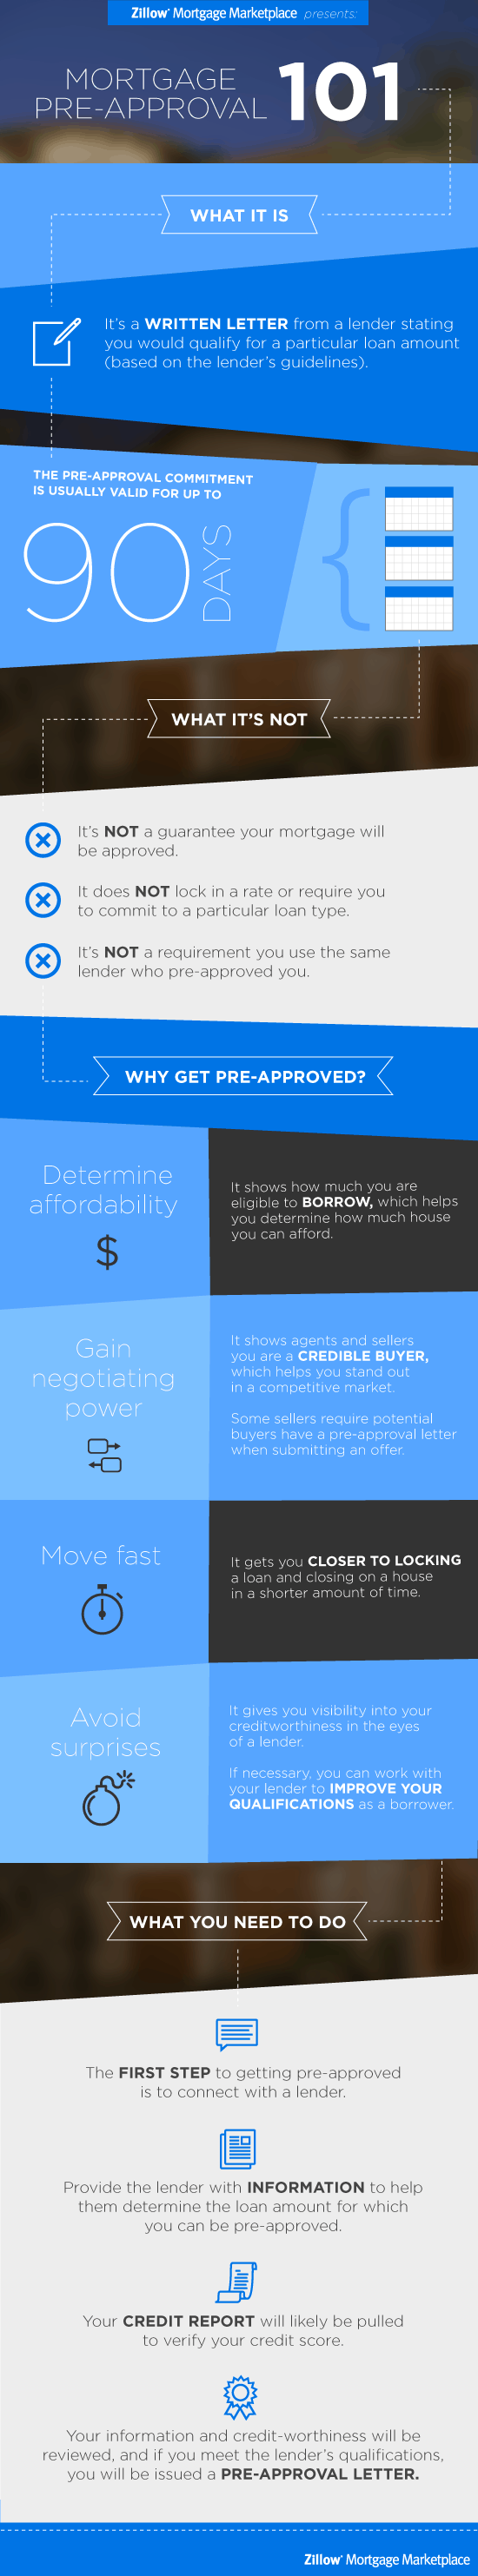 Mortgage Pre-Approval 101 Infographic